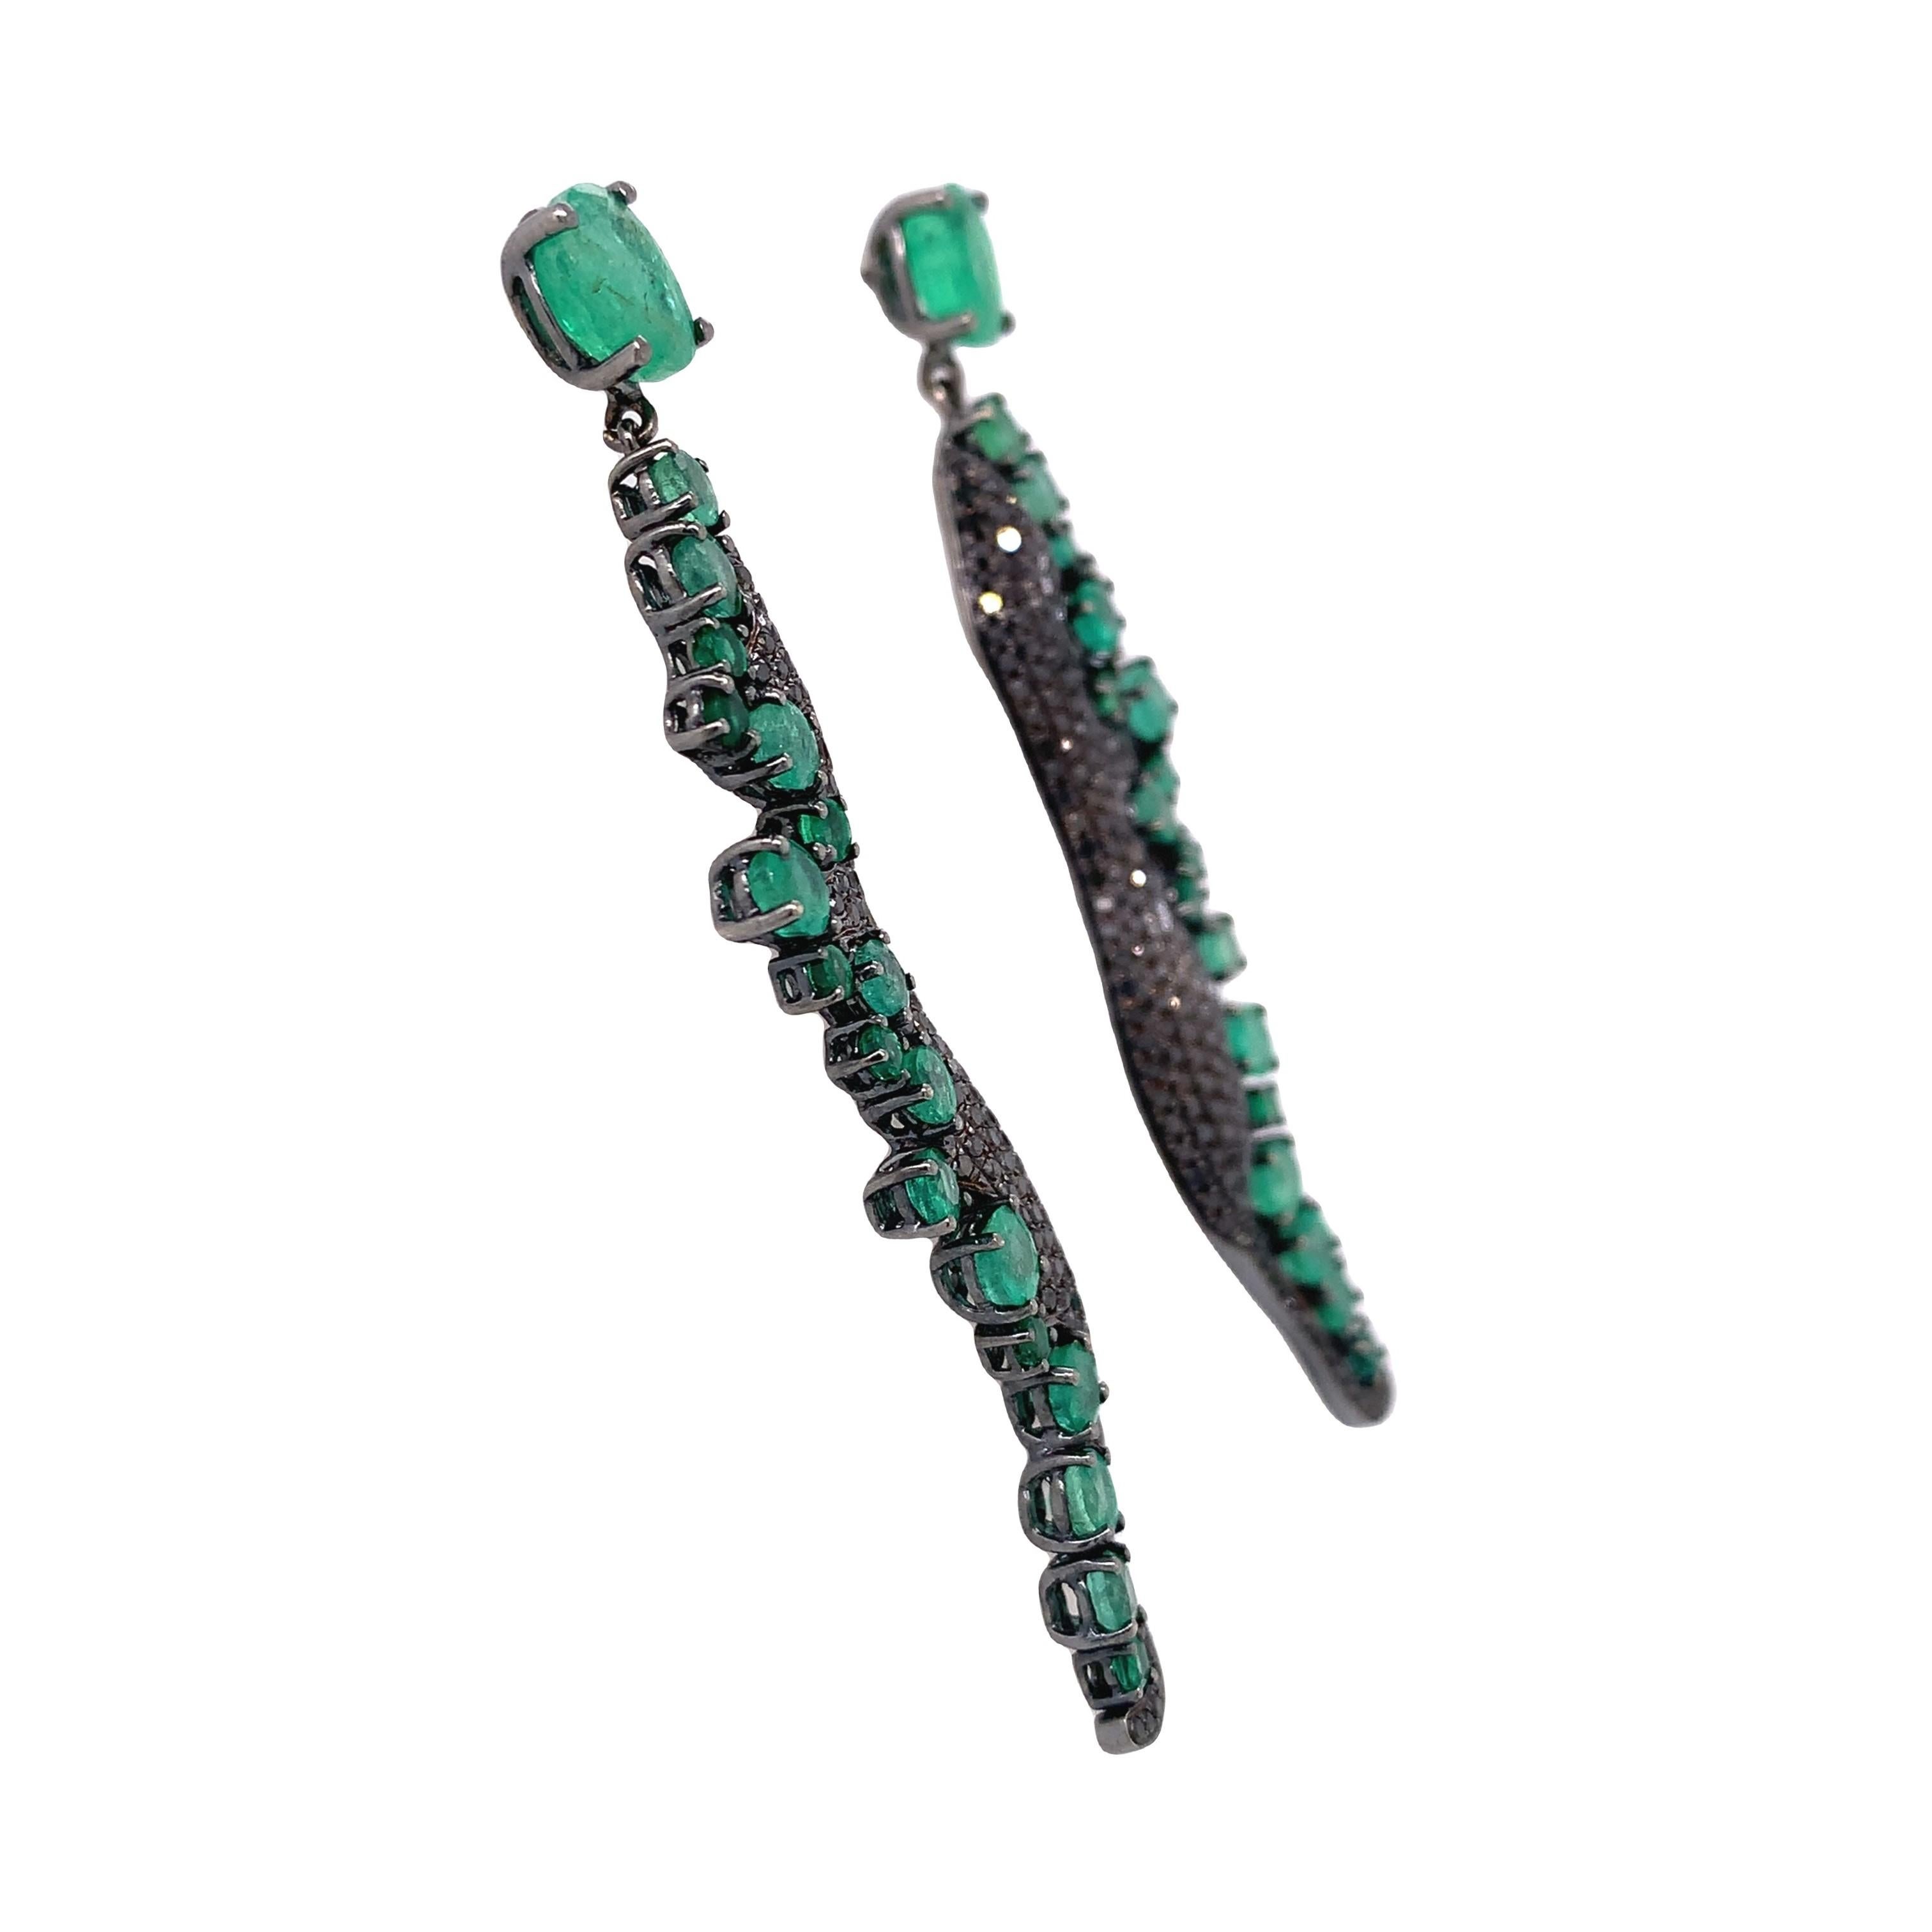 Green Lagoon Collection 

Drop chandelier Emerald with black Diamond pavé set in 18K black rhodium gold. 

Emerald: 5.66ct total weight.
Black Diamonds: 1.37ct total weight.
All diamonds are G-H/SI stones.
Height - is approximately